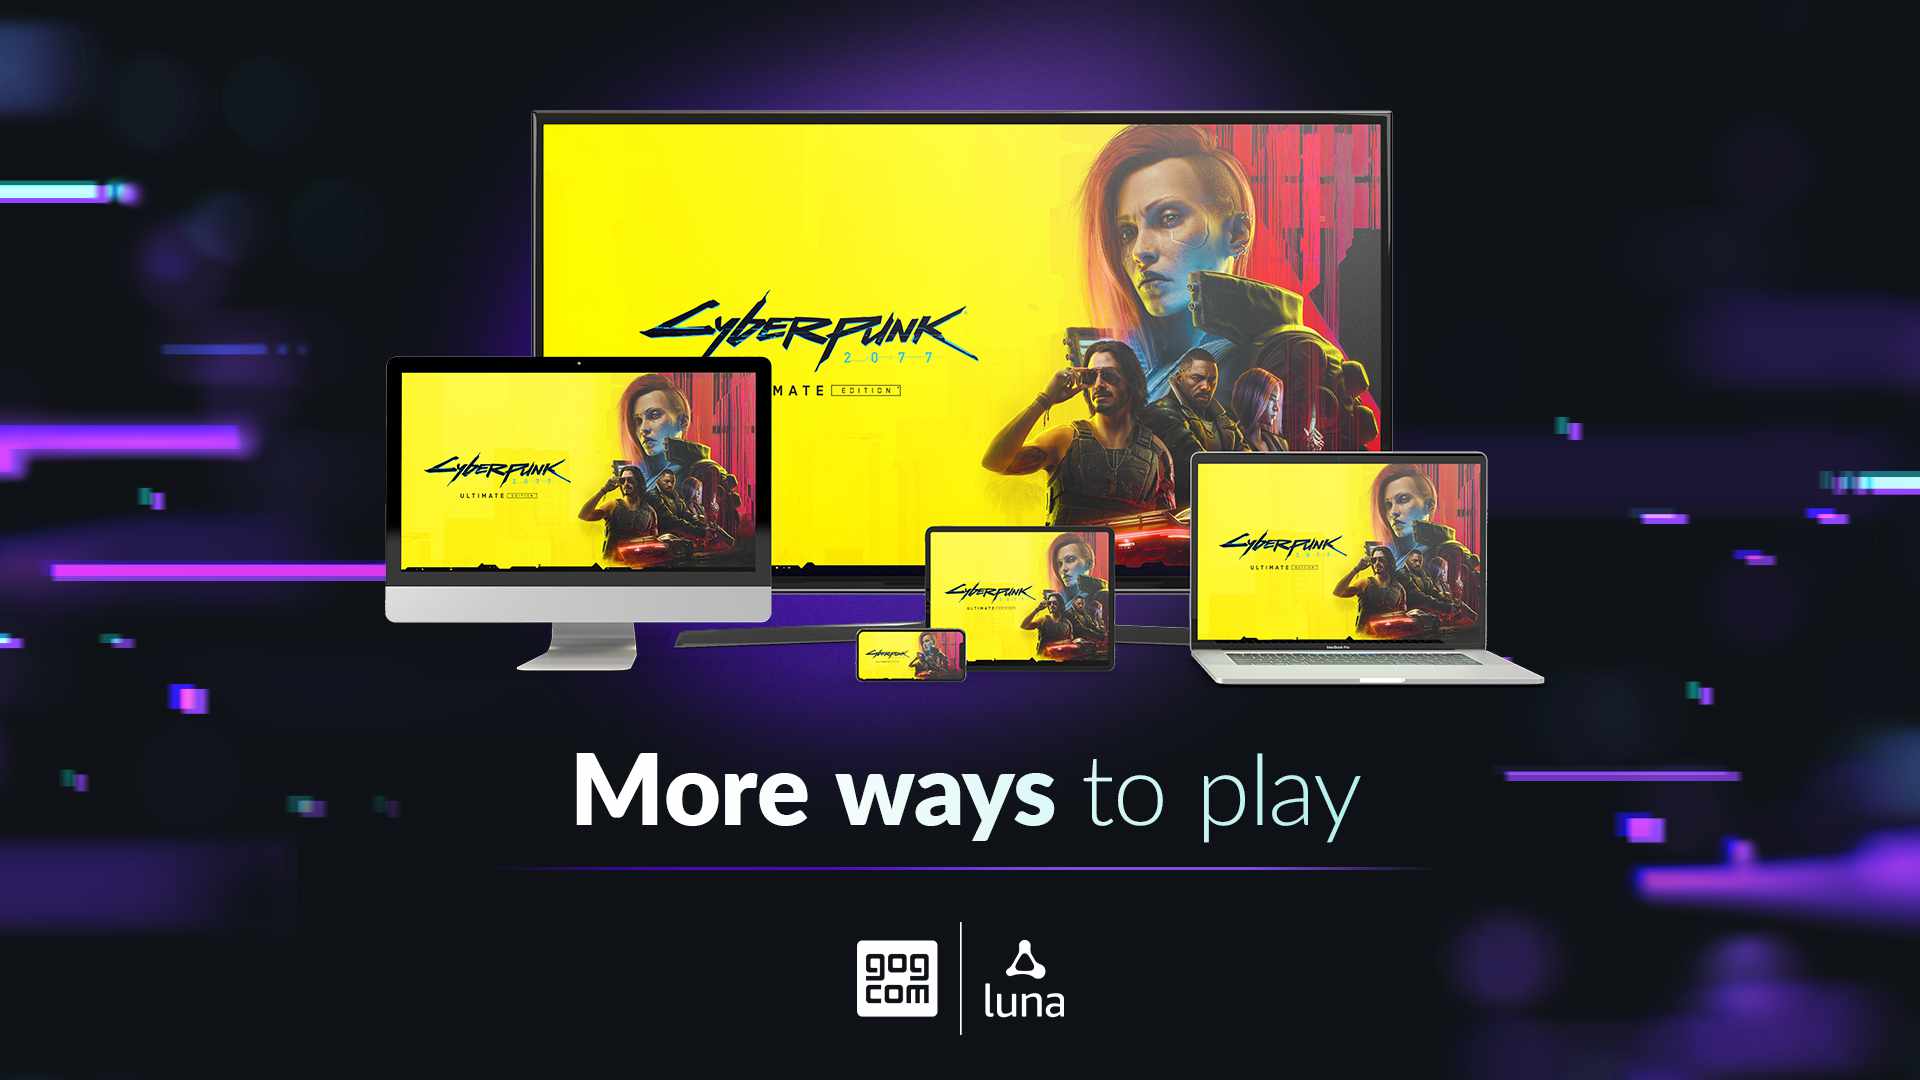 A photo showing a screenshot of Cyberpunk 2077 on multiple devices, like a TV, smartphone, Mac, tablet, and latop